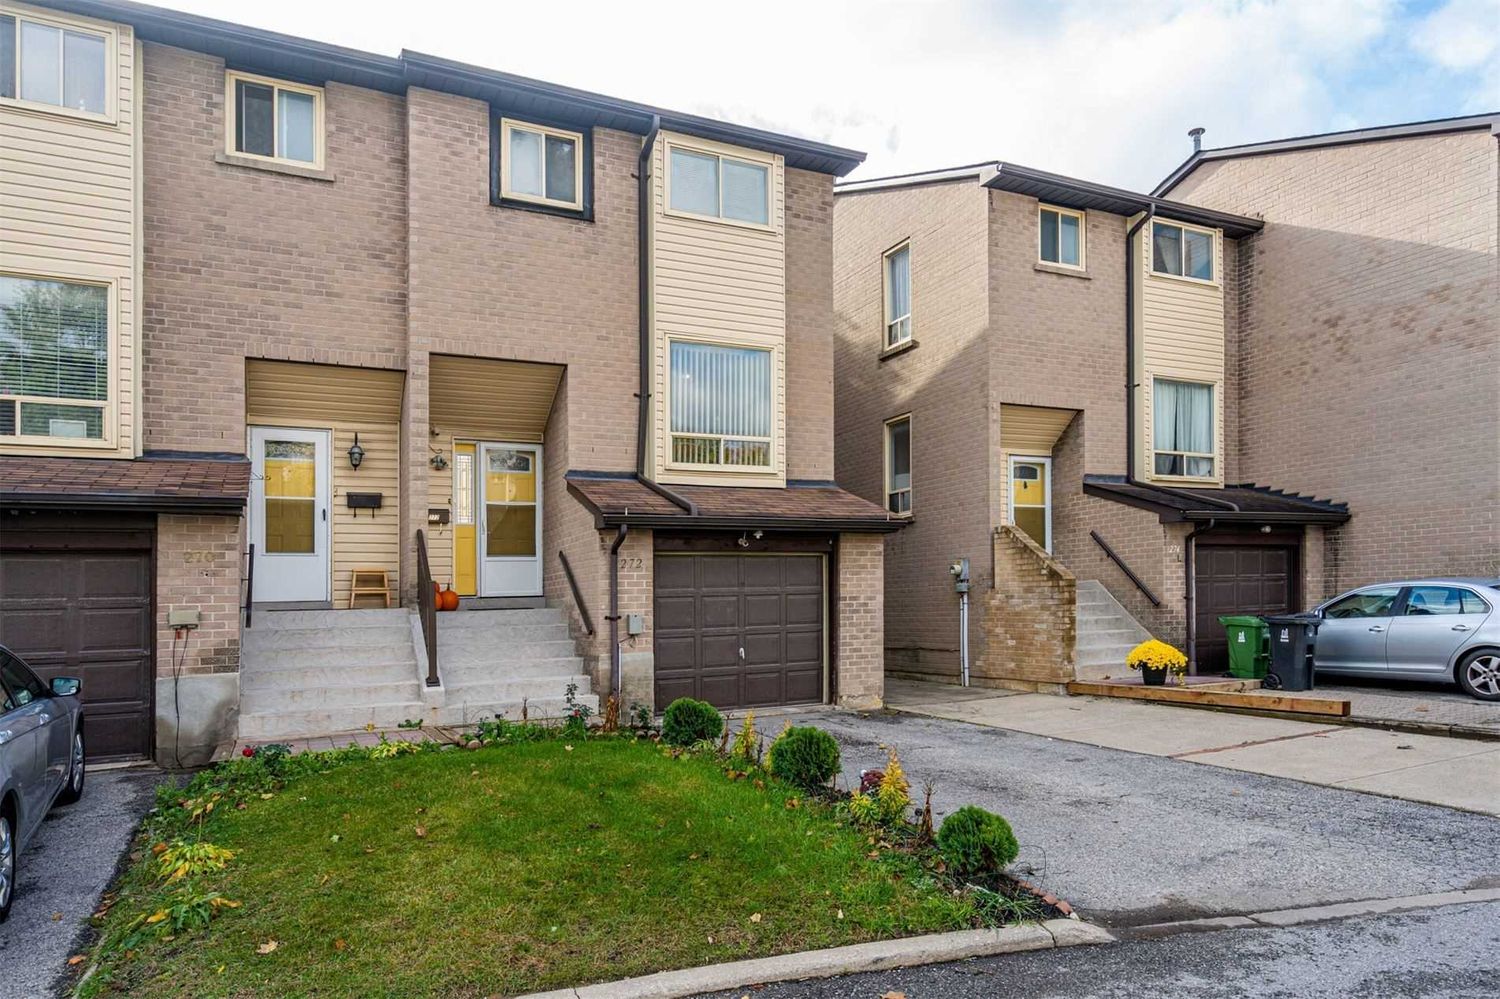 55 Collinsgrove Road. 55 Collinsgrove Road Townhomes is located in  Scarborough, Toronto - image #2 of 2